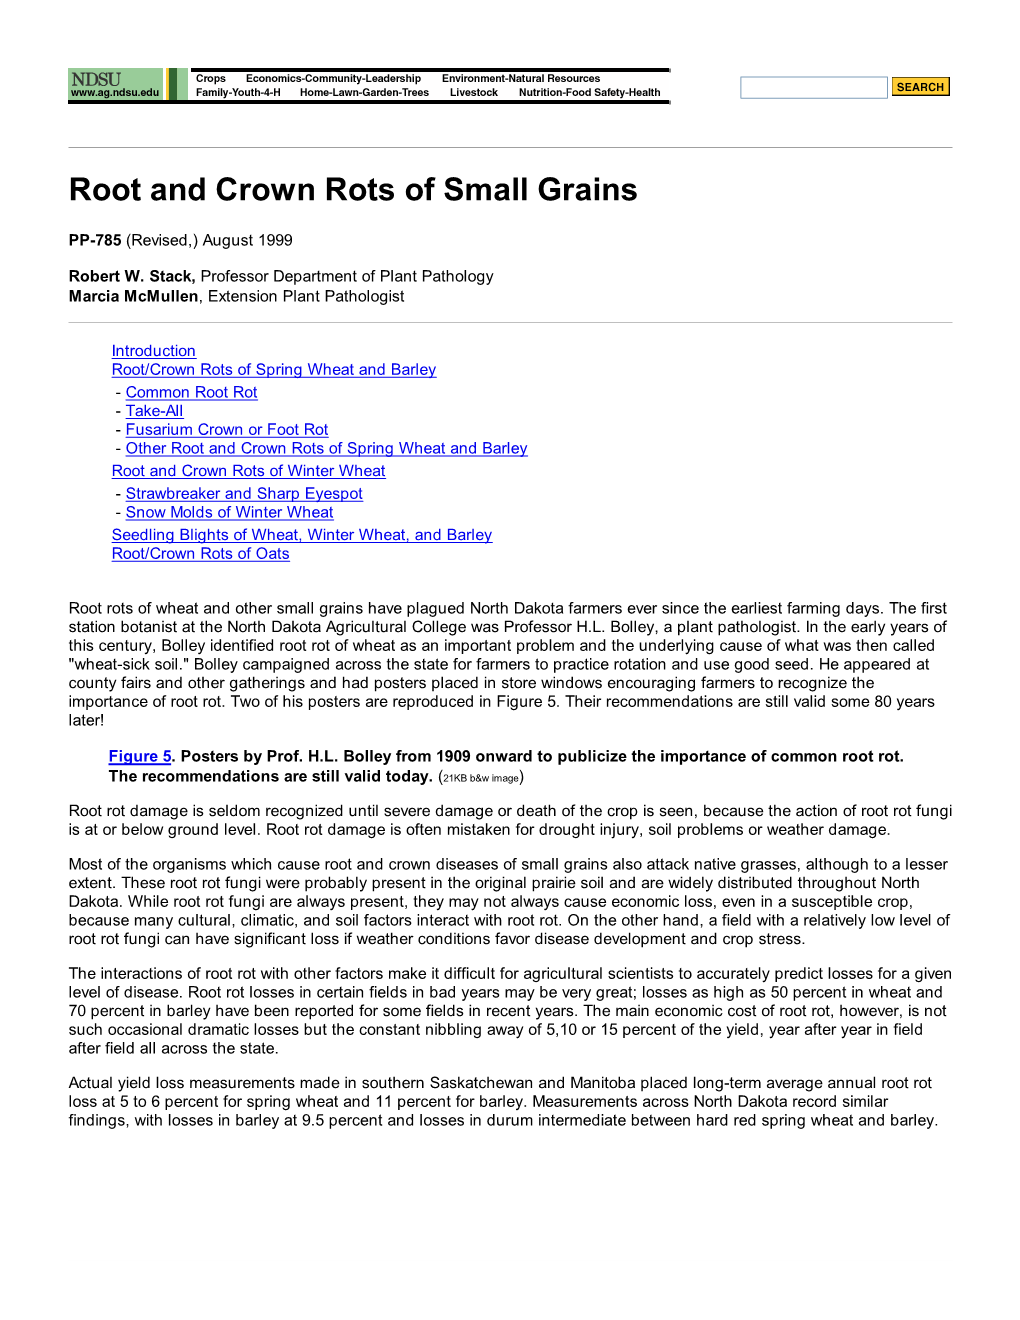 Root and Crown Rots of Smal